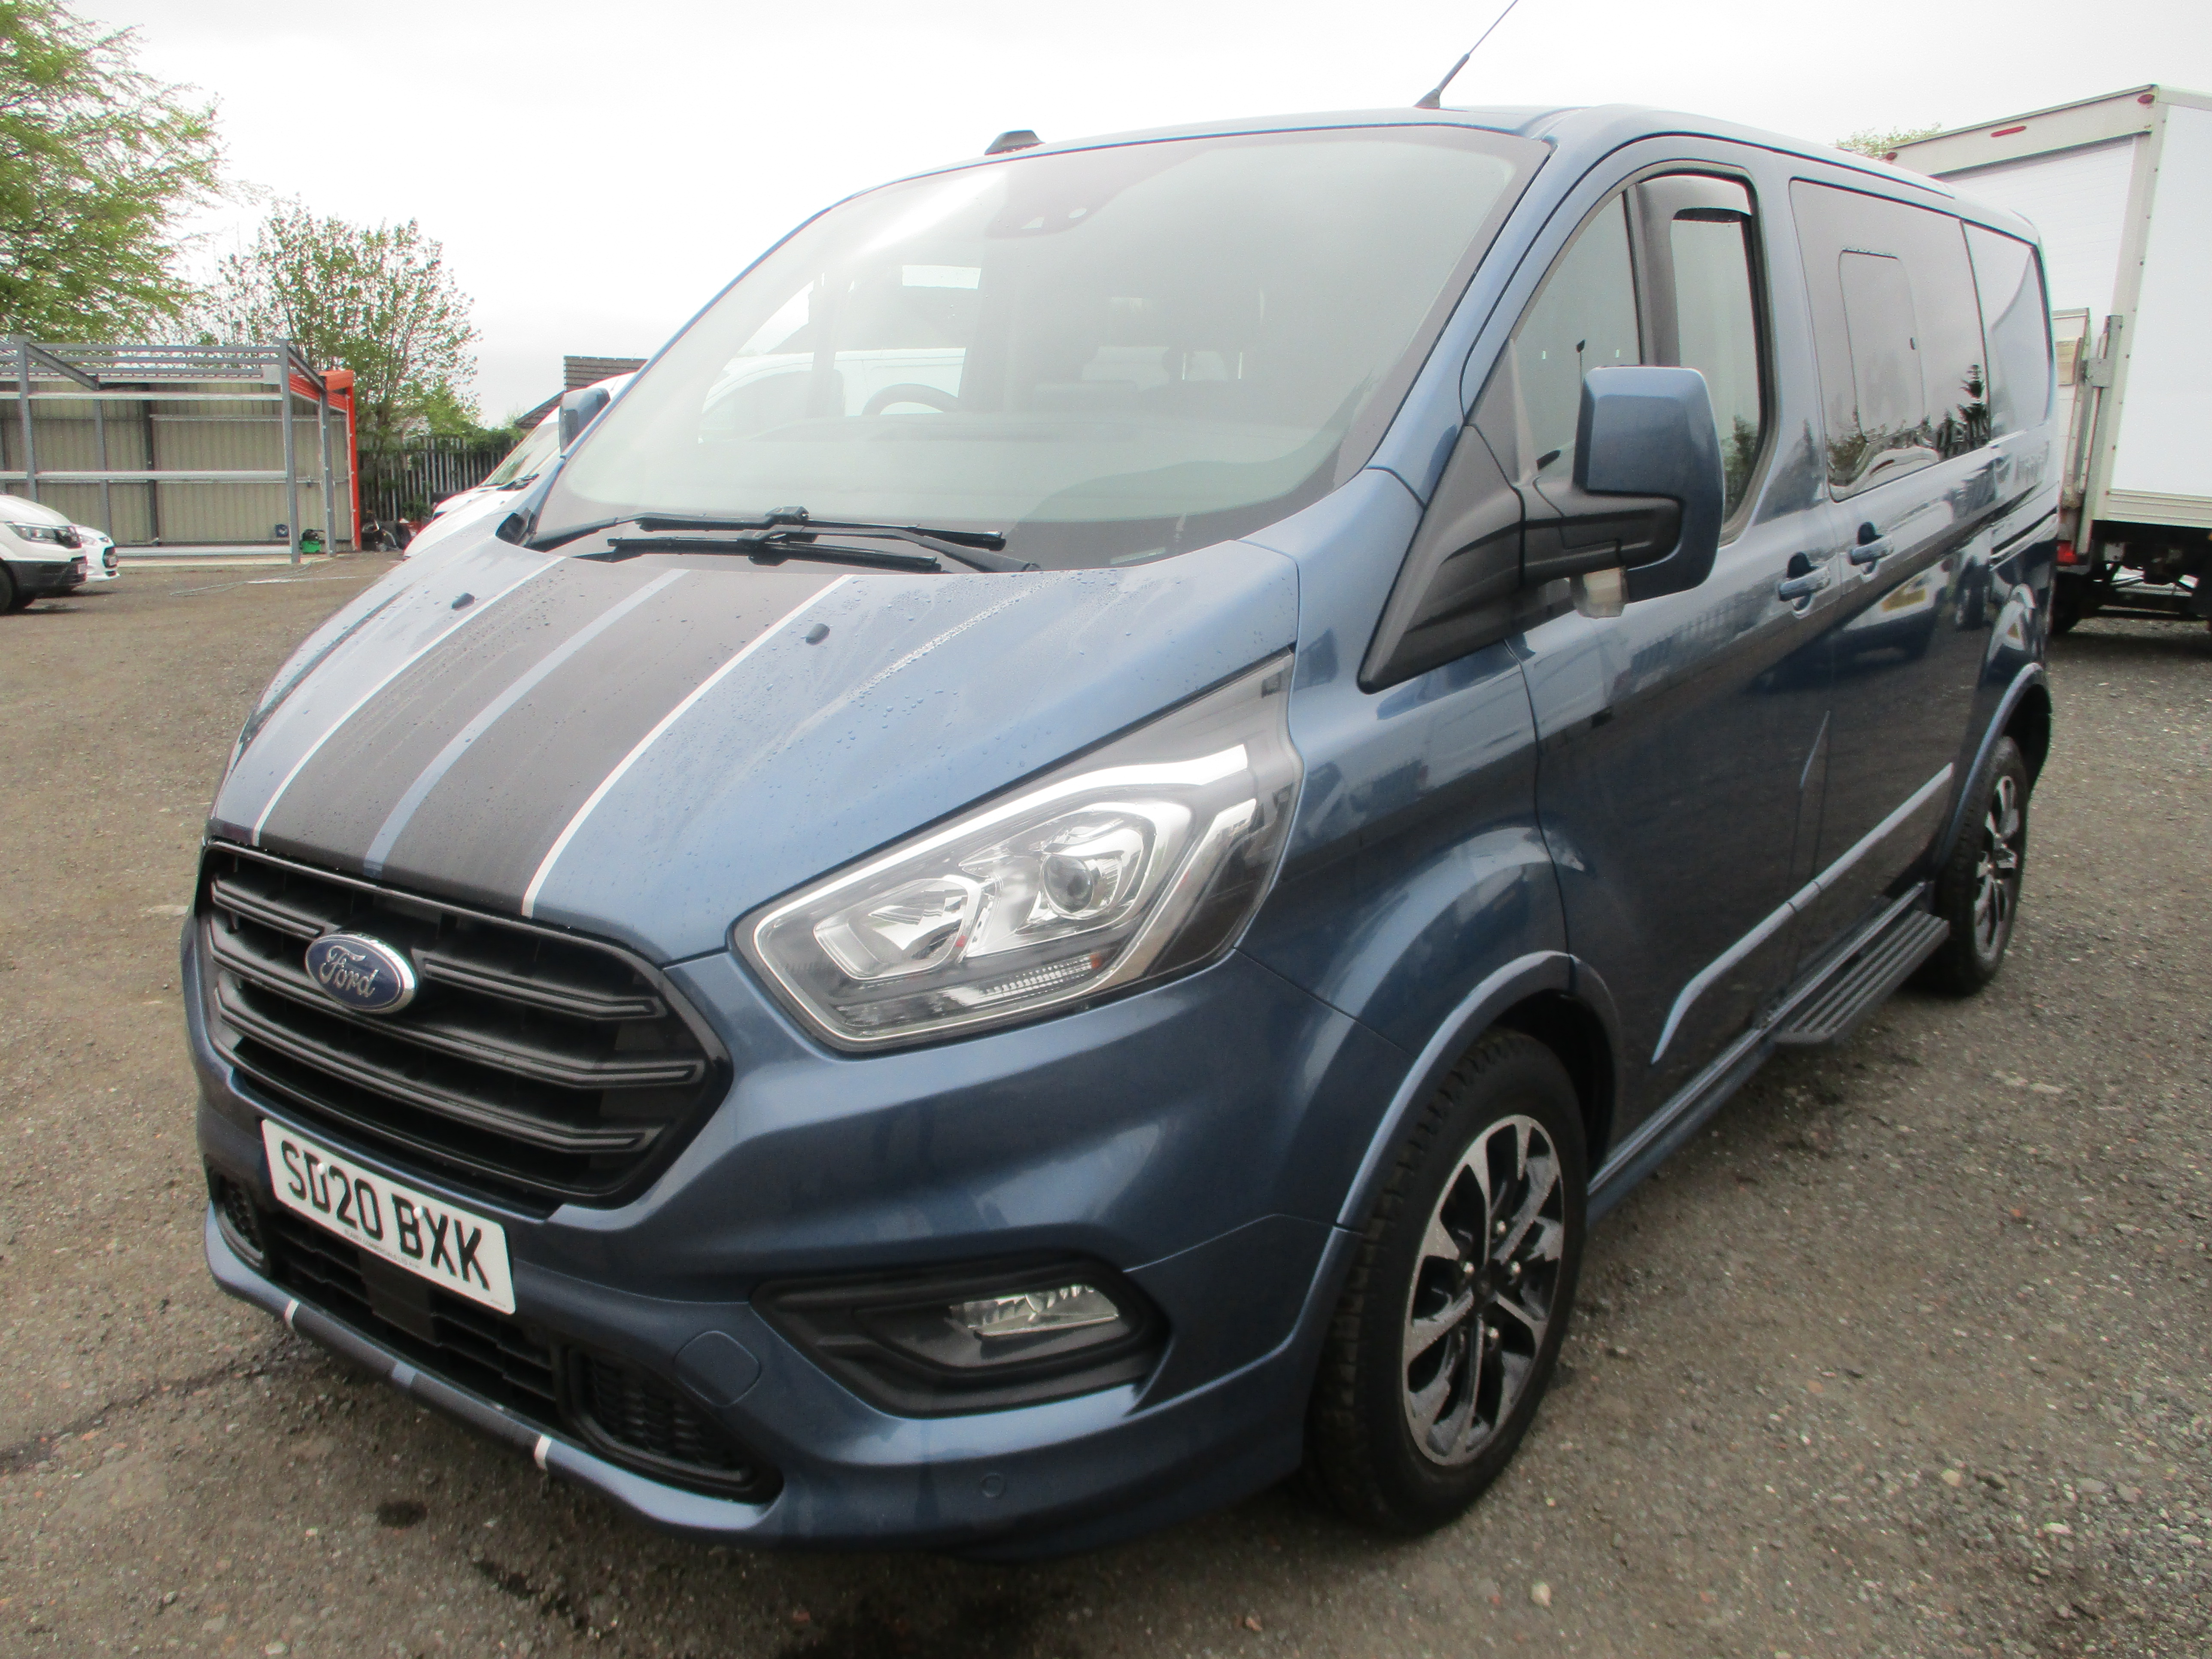 Ford Custom 320 L1H1 2.0 EcoBlue 185PS DCIV (5 Seater) AUTO Sport Van ( £2,050 OFF RRP )